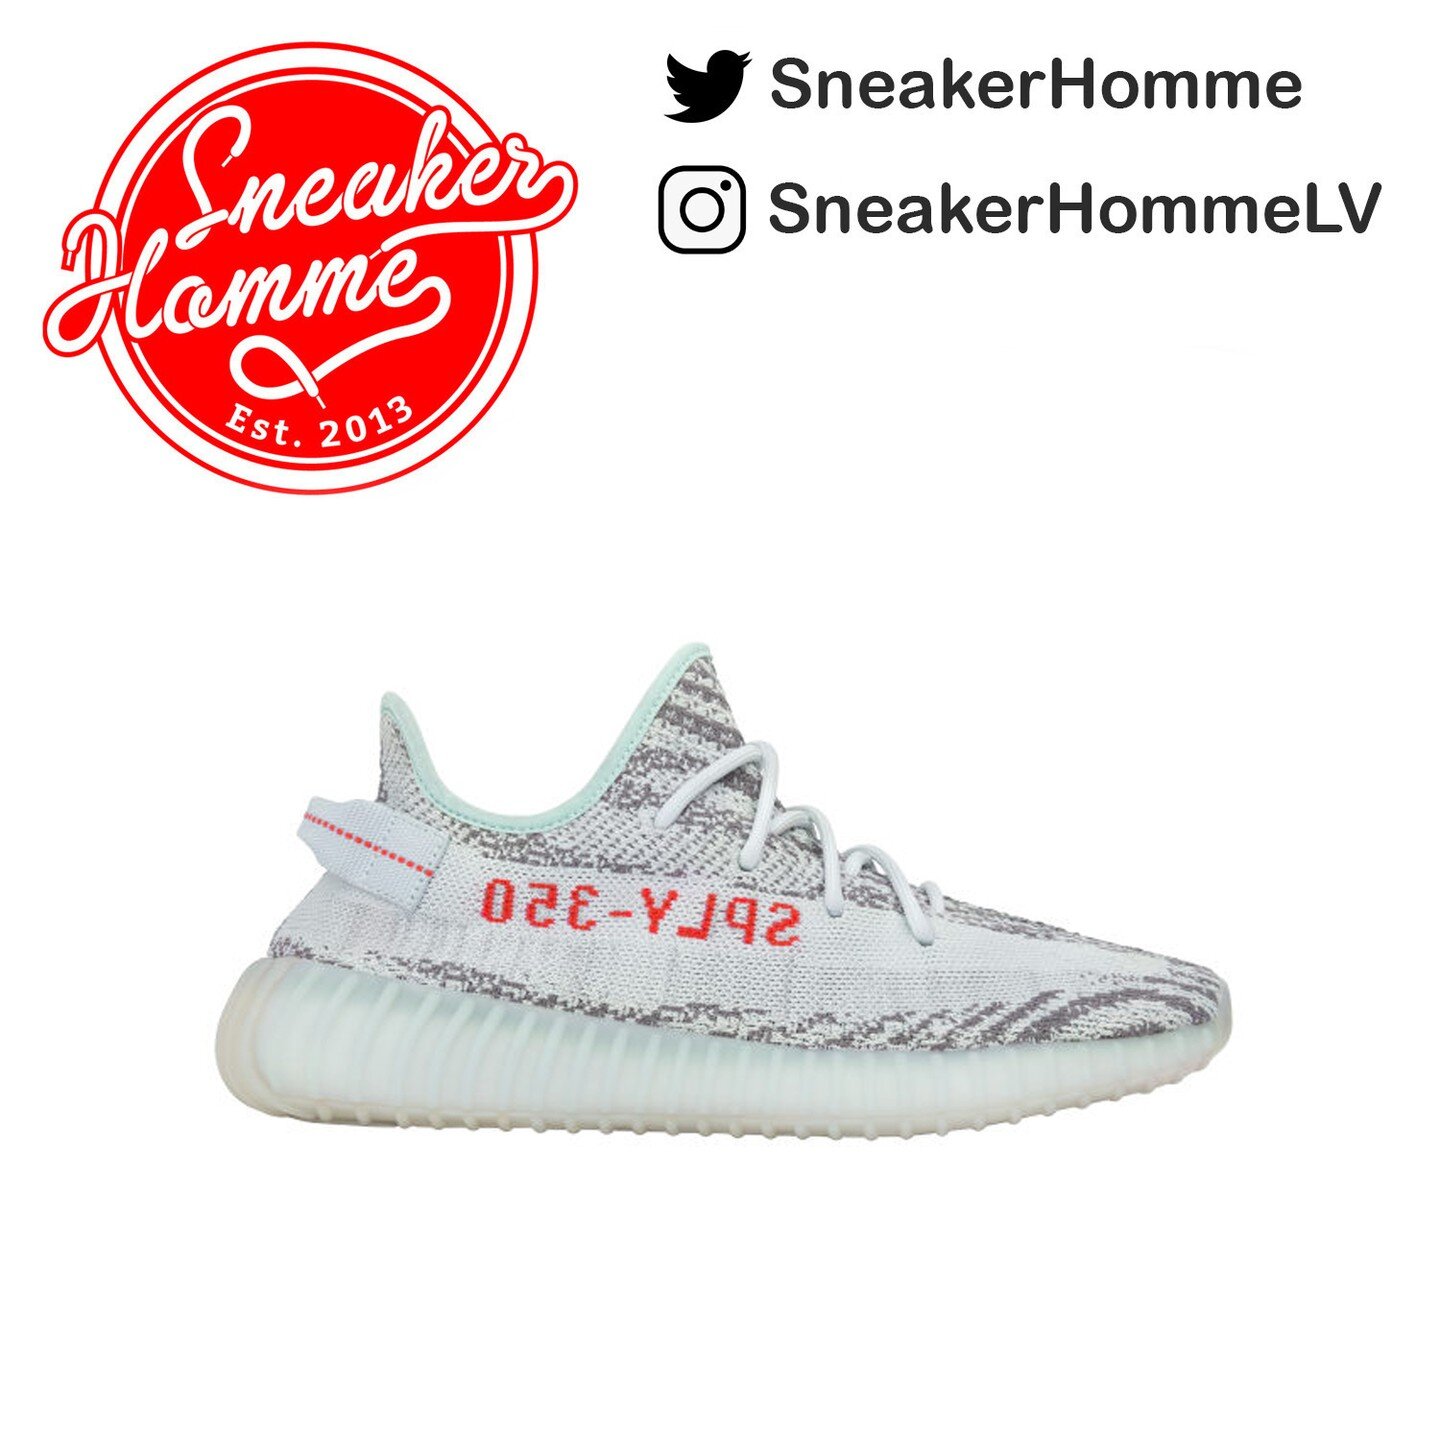 SneakerHomme Auto-Checkout is now open for Yeezy Boost 350 V2 &ldquo;Blue Tint&quot;

Releasing 1/22/2022

Slot Fee: $25

-Slots will only be ran on YeezySupply.

Non-Acceptable Cards
-CapitalOne or CapitalOne VCC
-Costco Cards 
-BestBuy Cards
-Disco